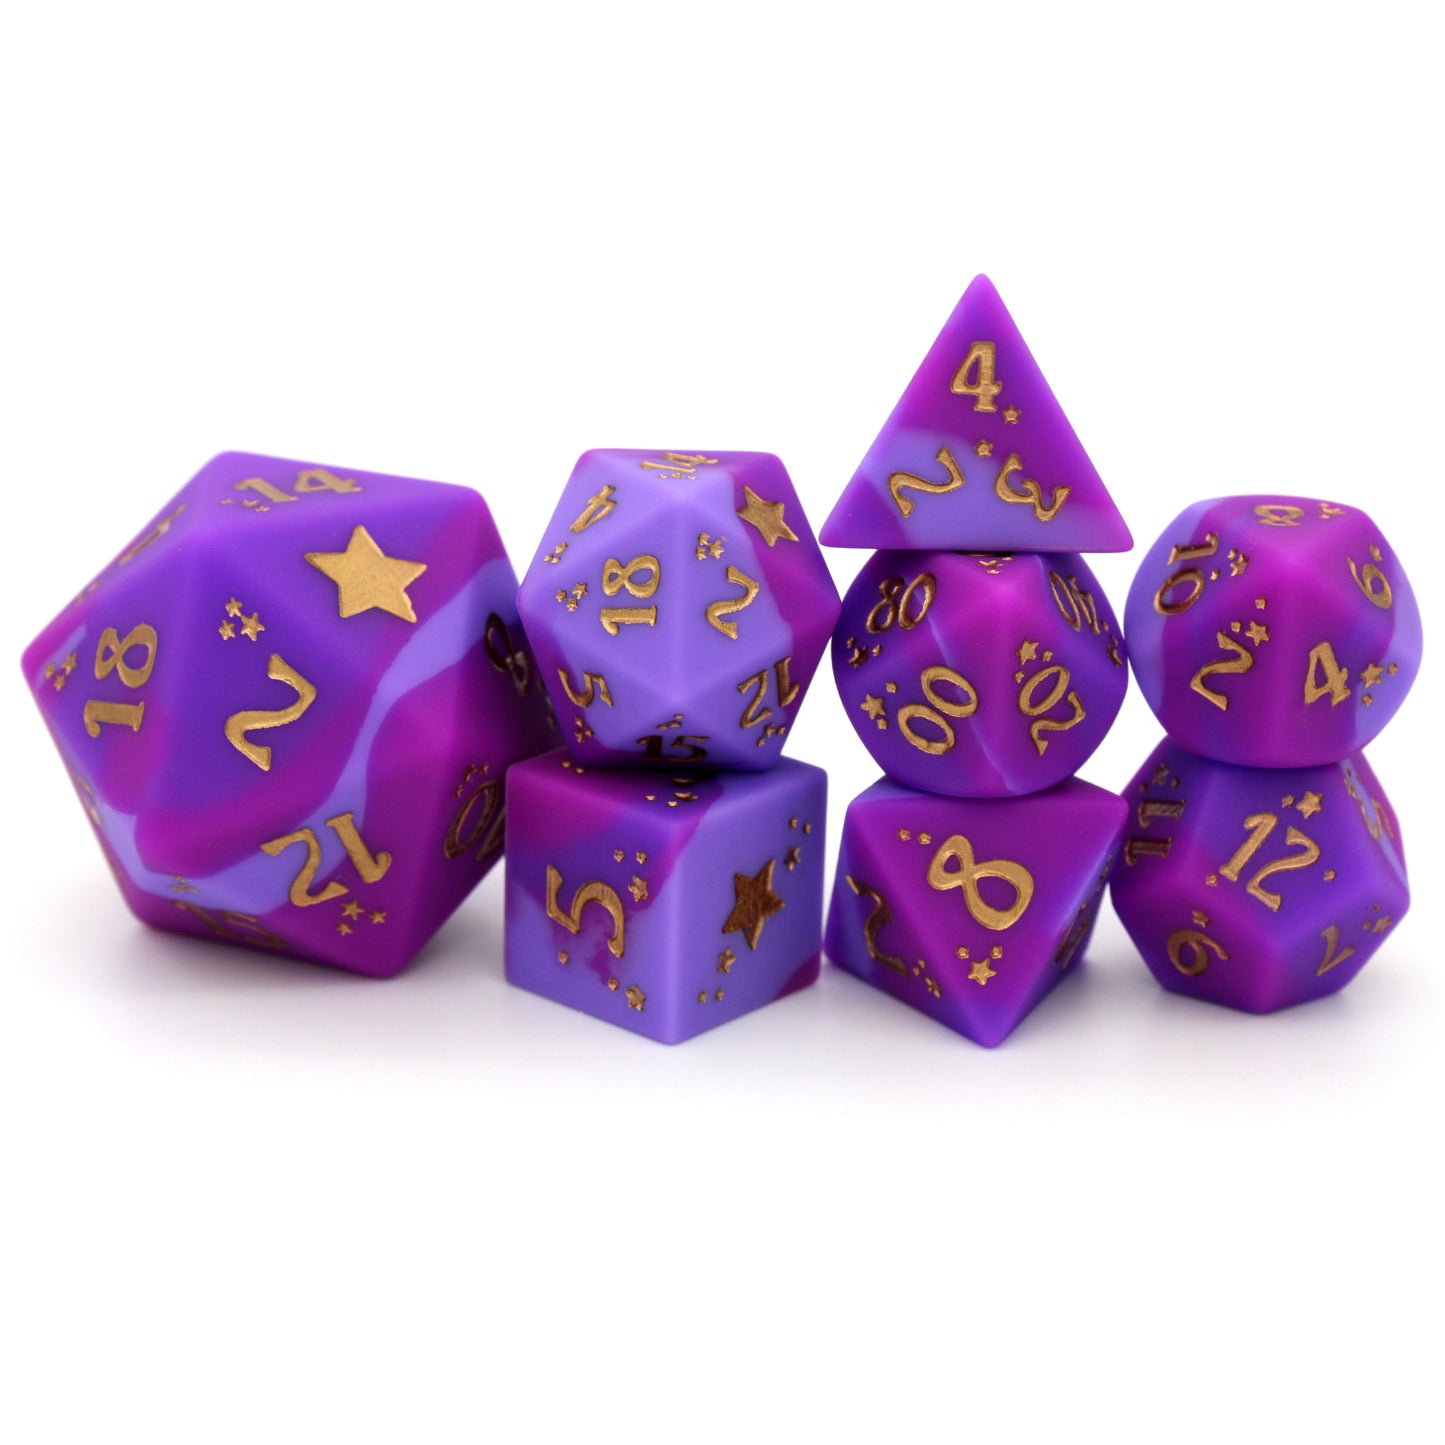 Chaotic Good is an 8-piece, swirled silicone dice set in noble pinks and purples. It features a starry-eyed, gold ink design.